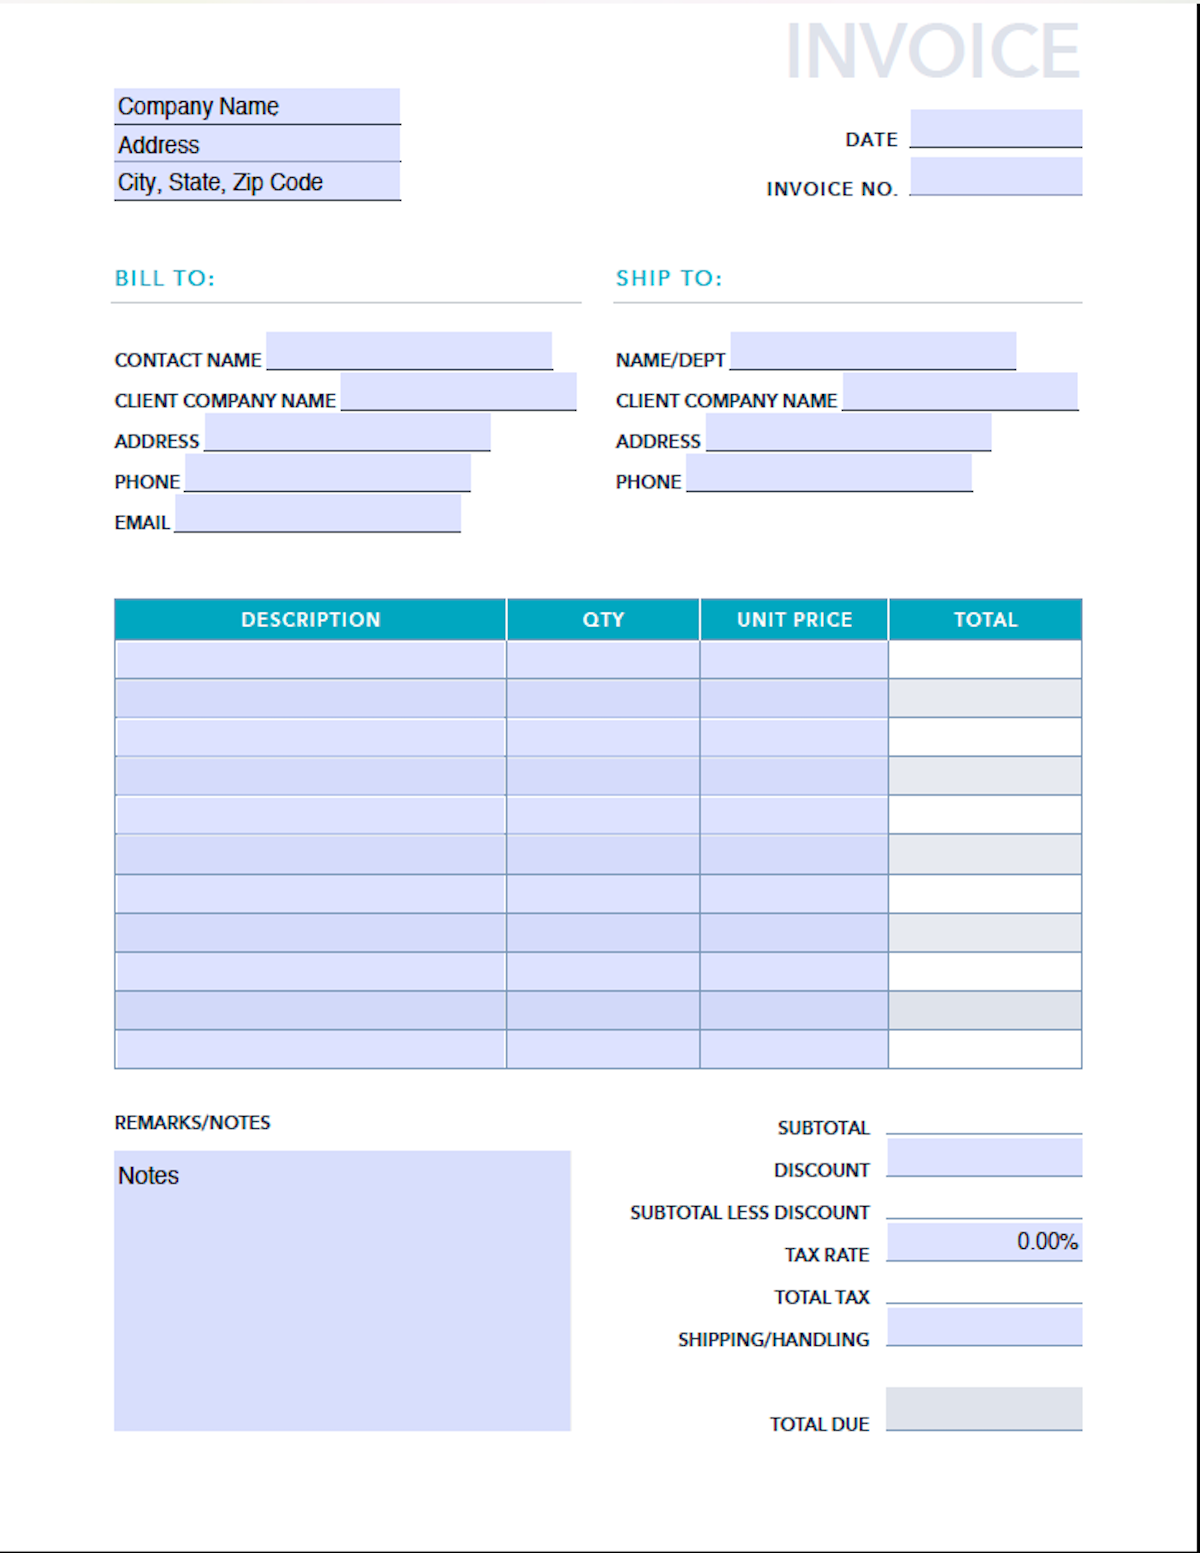 Free Invoices Receipts Pdf Excel Template Hubspot